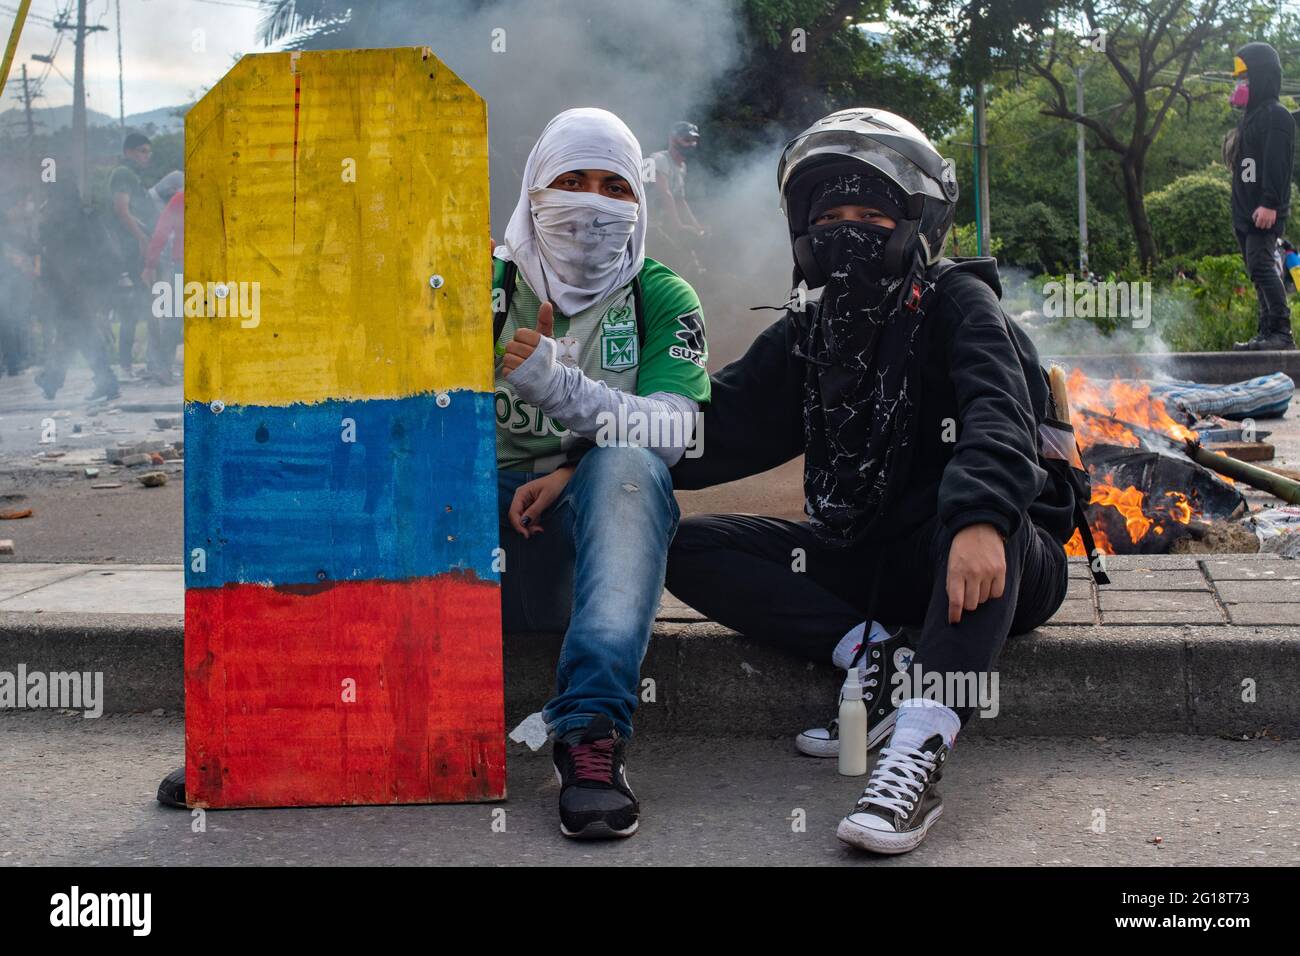 Members of the front line pose for a photo with a handcrafted shield with the Colombian national flag as clashes between demonstrators and Colombia's riot police (ESMAD) erupt in Medellín, Colombia after several weeks of anti-government protest against President Ivan Duque's tax and health reforms and unrest and abuse of authority cases that leave at least 70 dead according to NGOs on June 4, 2021. Stock Photo